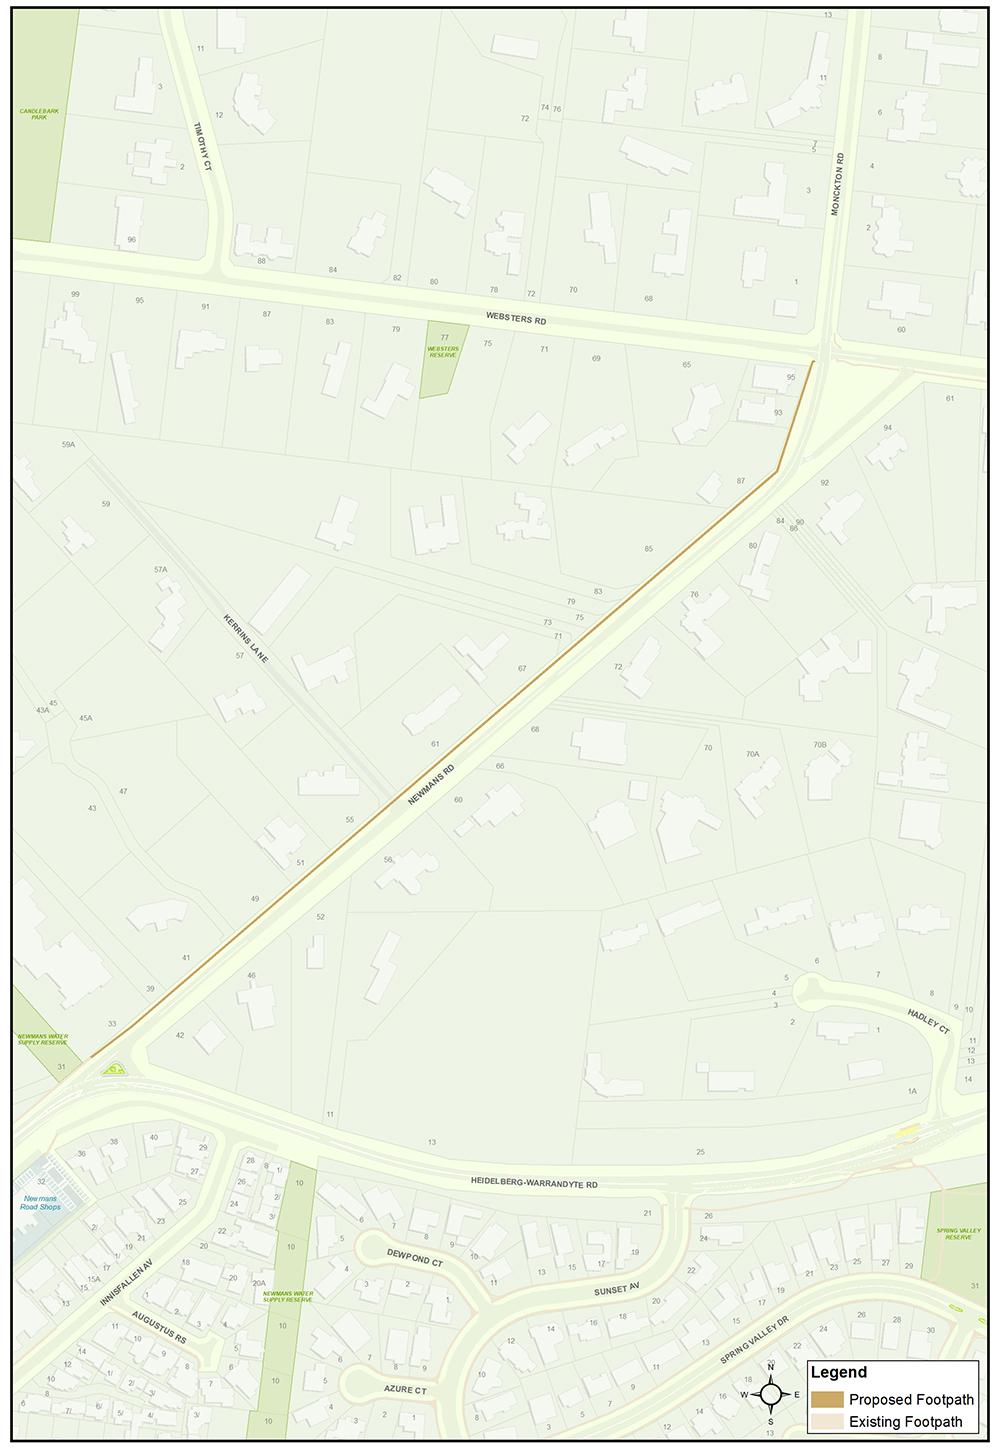 A map showing the location of the proposed footpath construction along Porter Street, Templestowe.